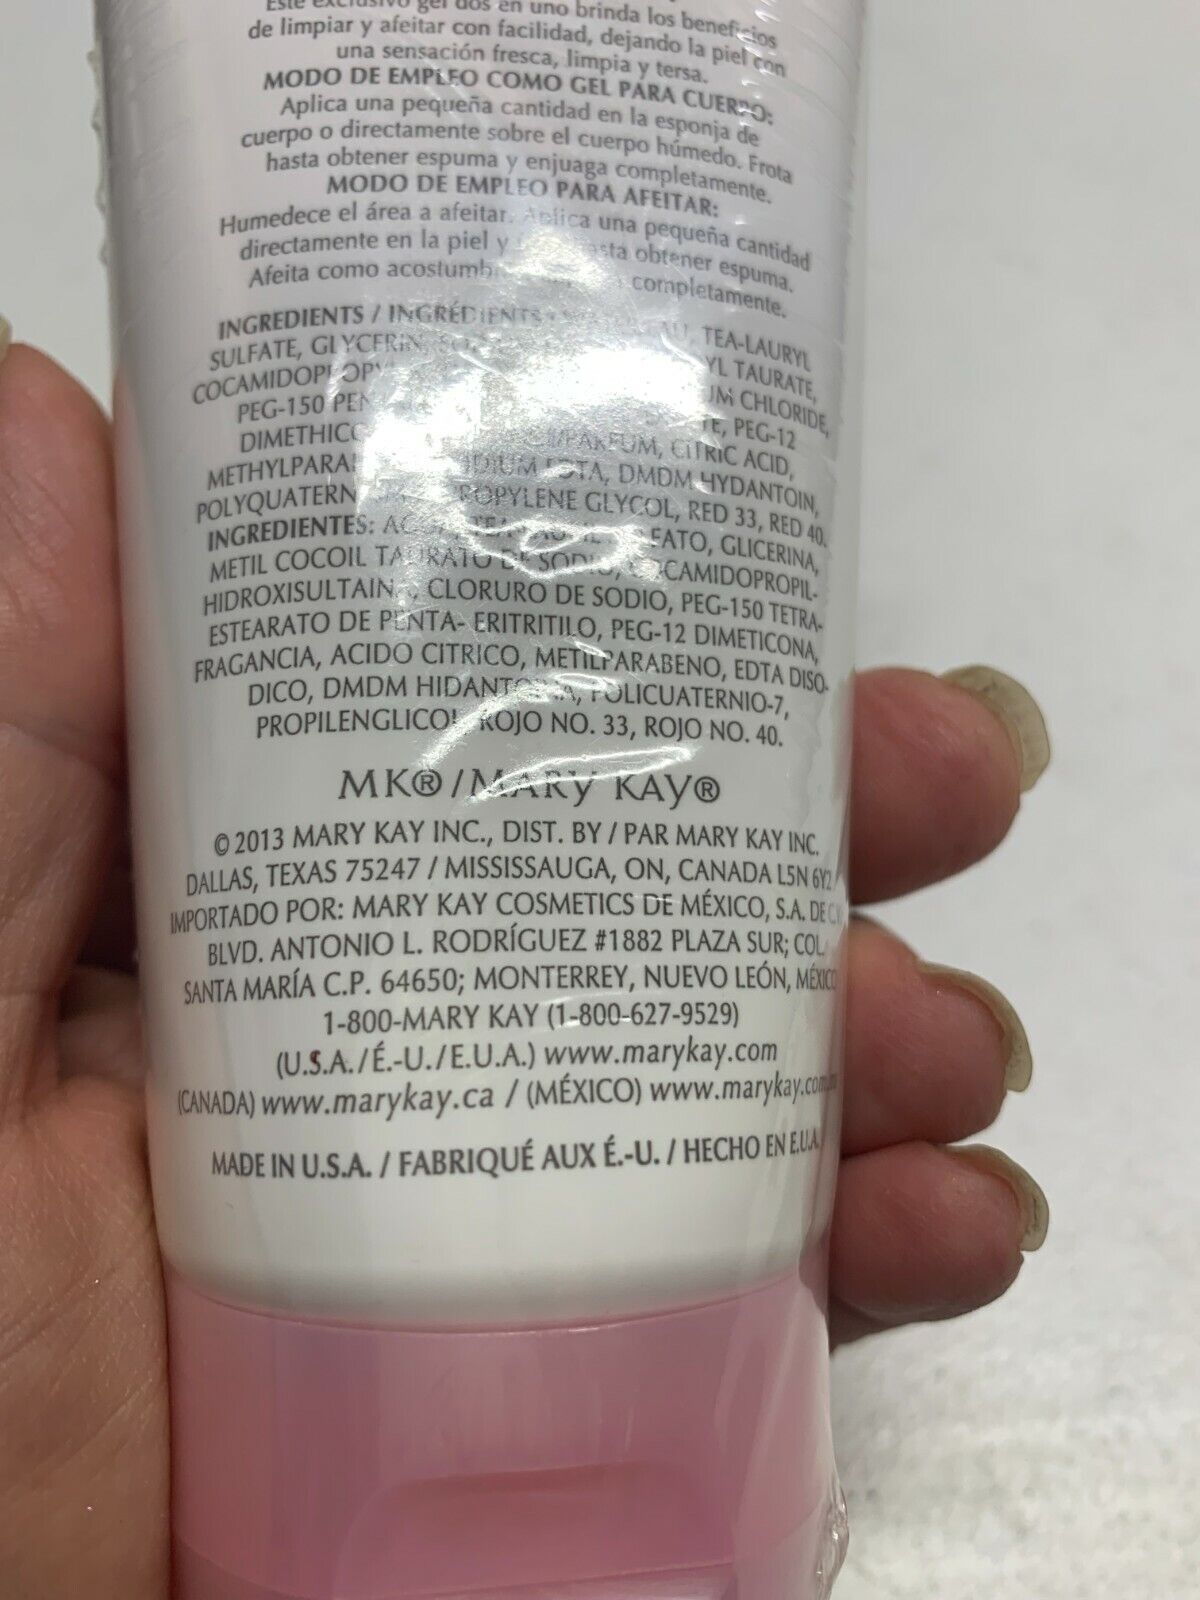 Mary Kay 2-in-1 Body Wash and Shave